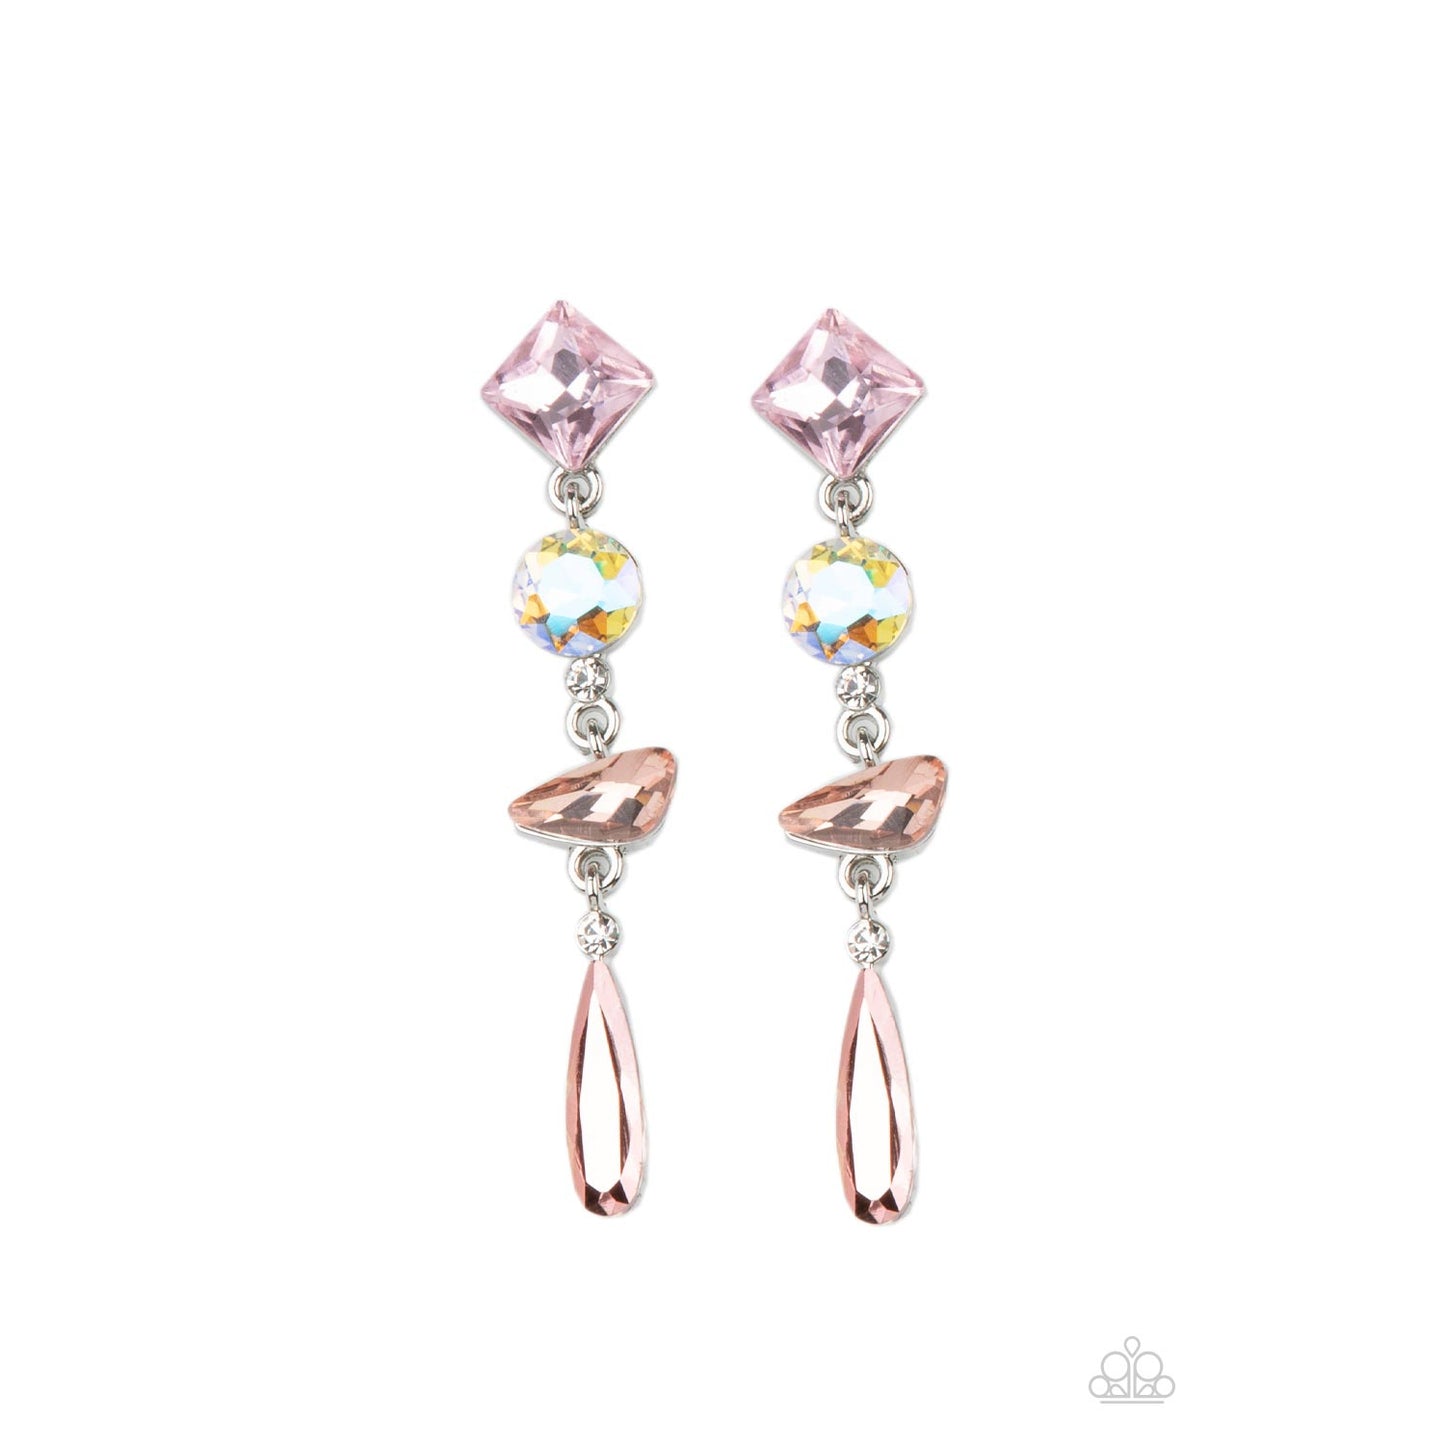 Rock Candy Elegance - Pink Iridescent Earrings - Paparazzi Accessories - GlaMarous Titi Jewels